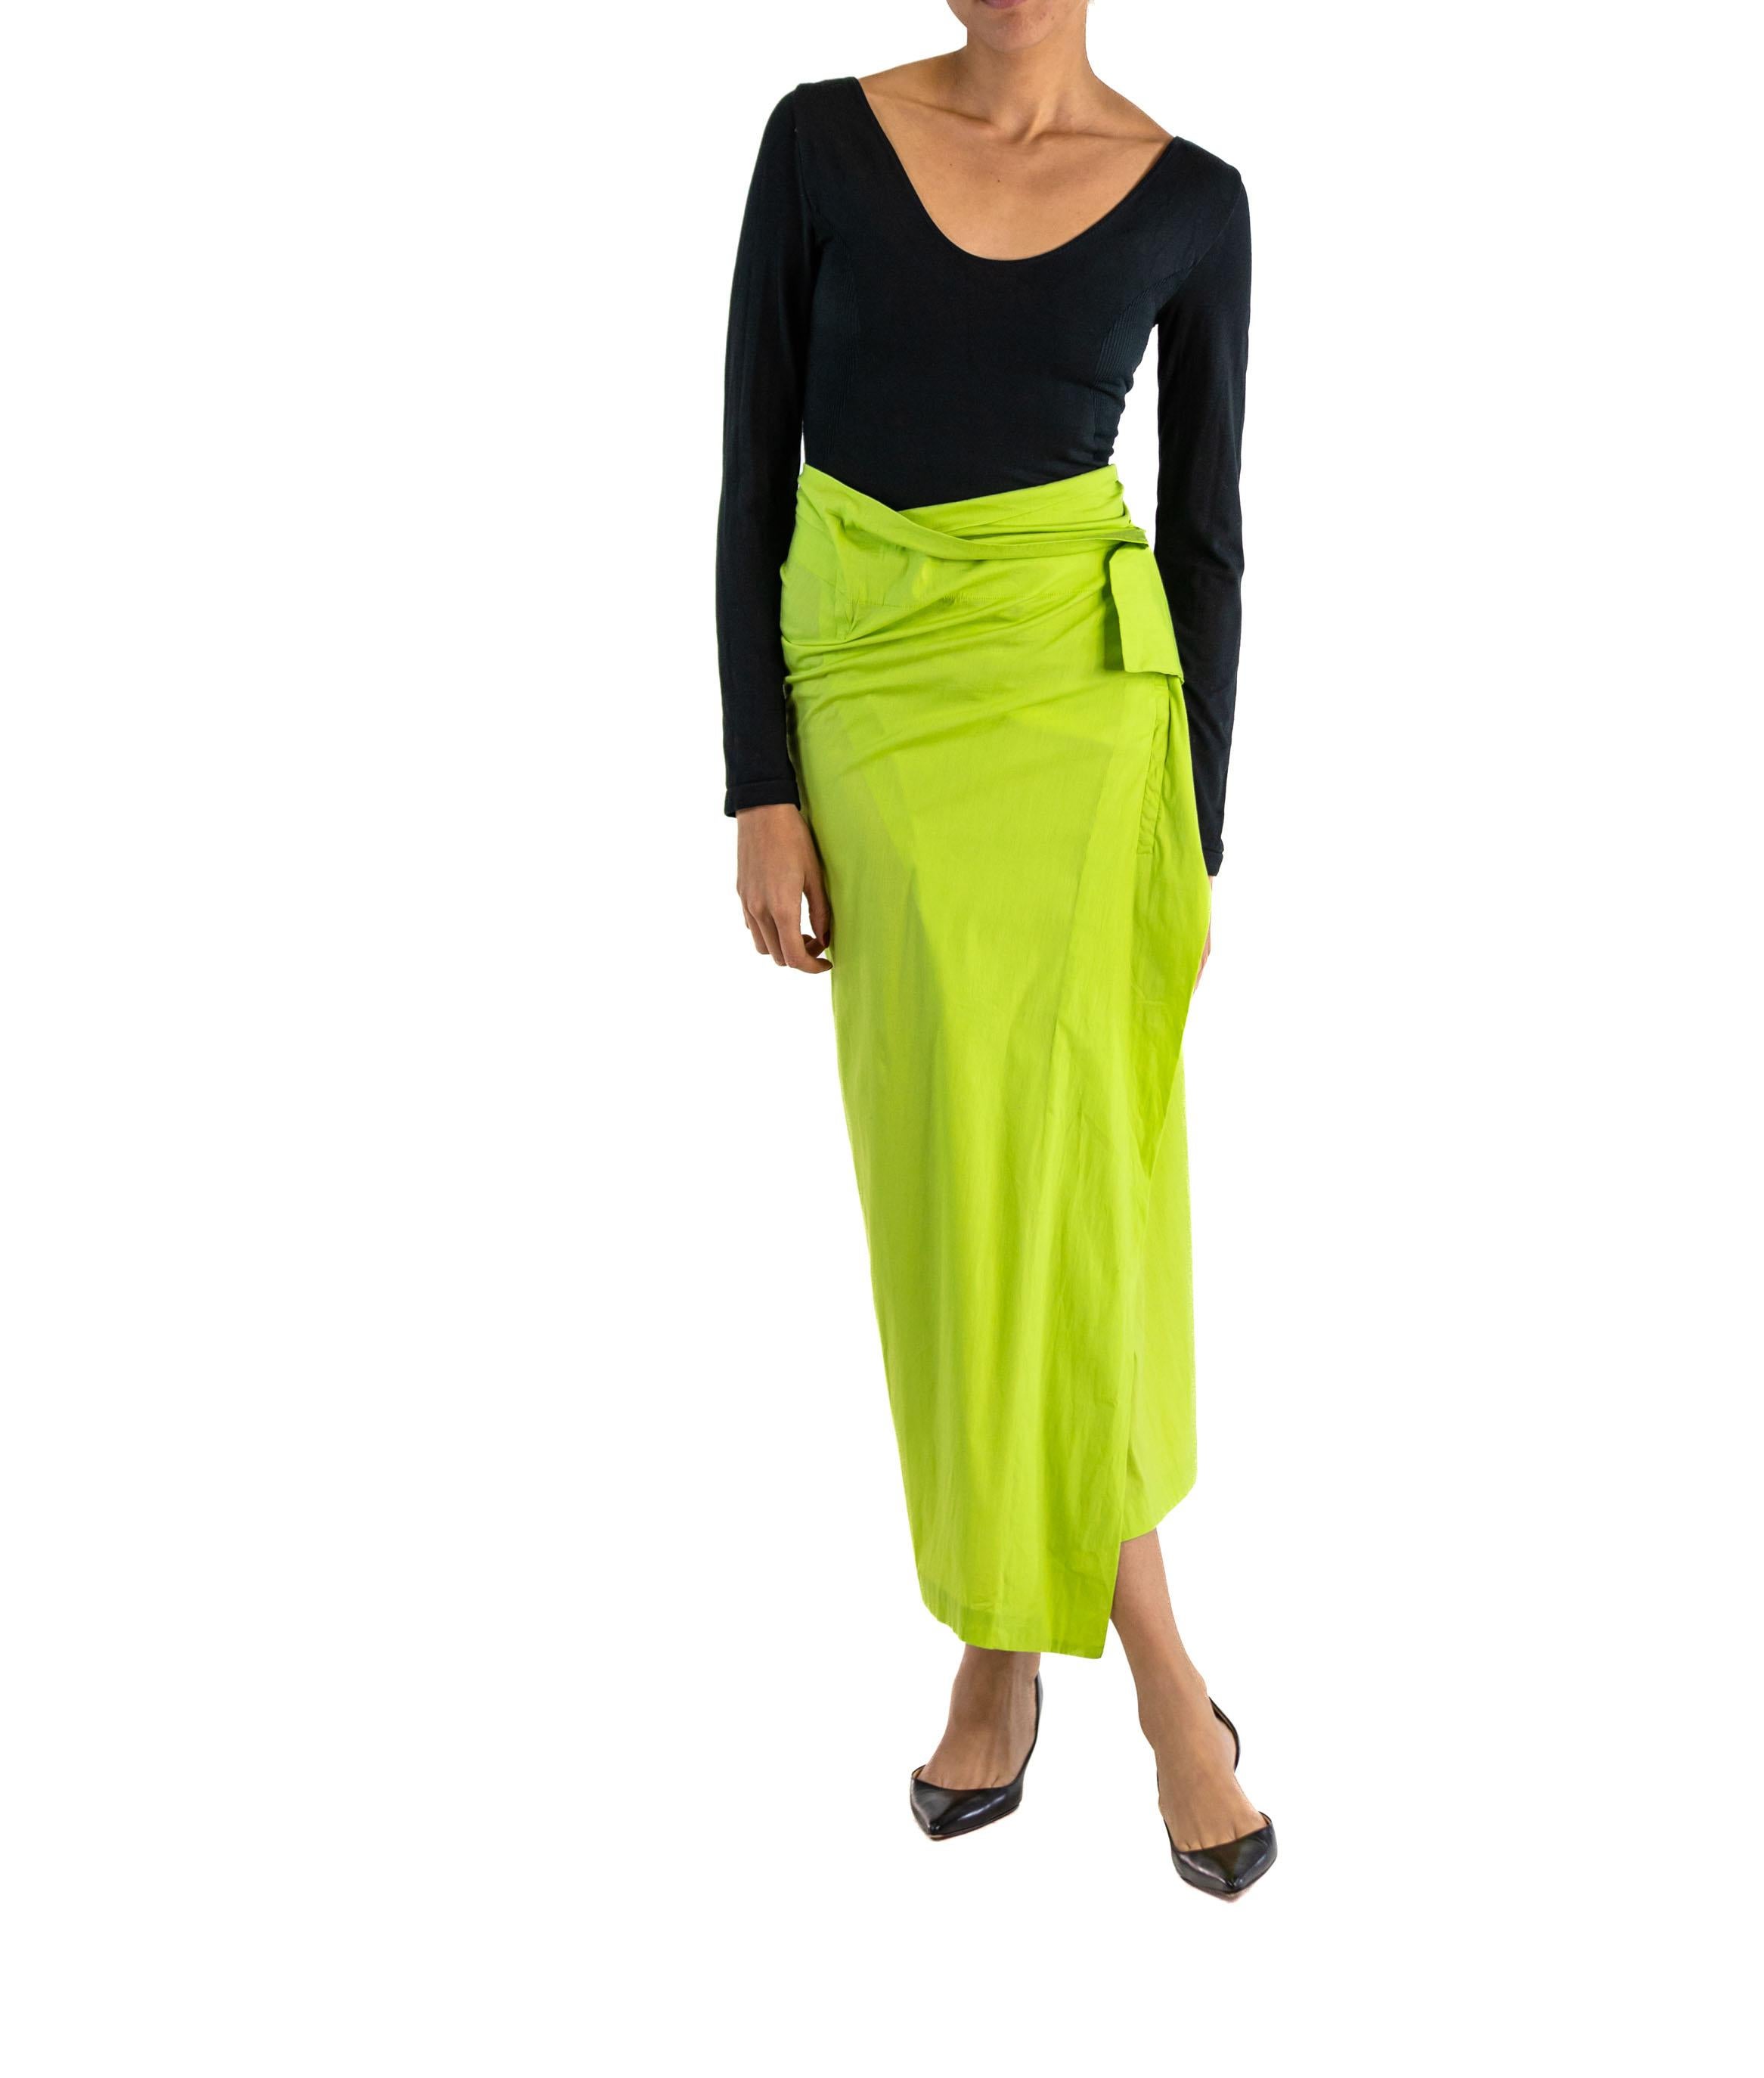 1990S ISSEY MIYAKE Lime Green & Black Rayon Blend Scoop Neck Top Skirt Ensemble For Sale 5